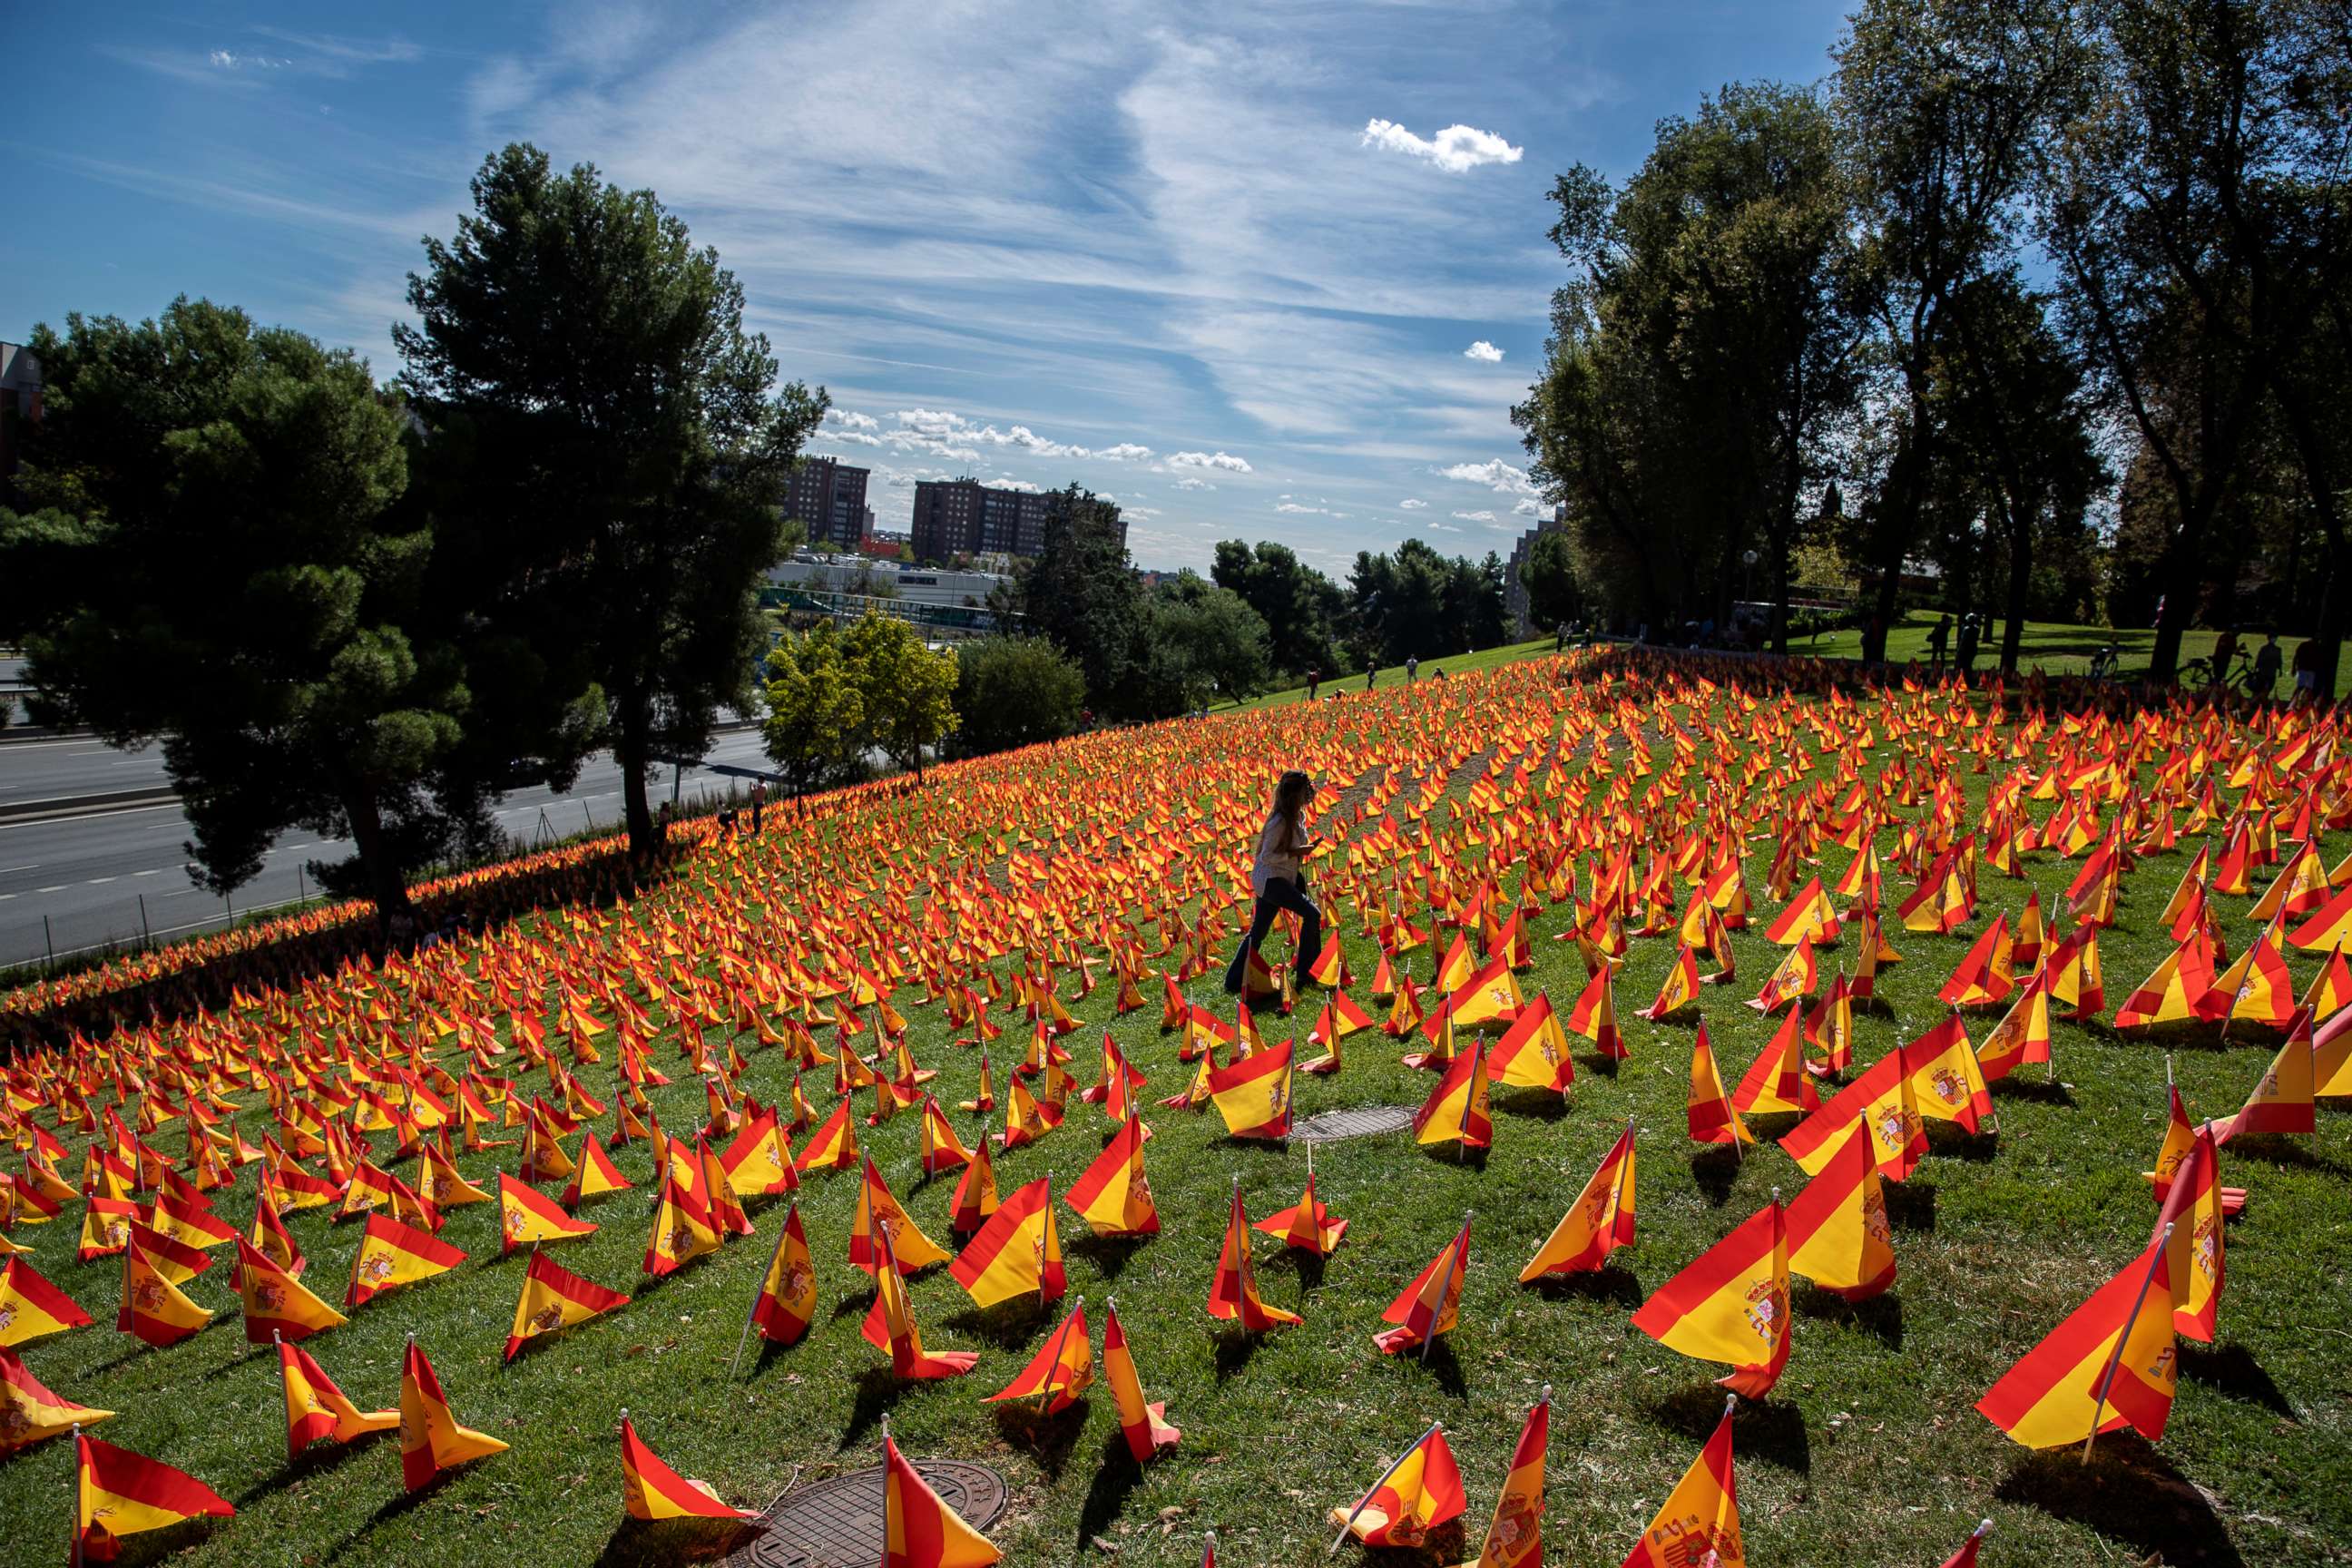 PHOTO: A woman walks among the Spanish flags placed in memory of COVID-19 victims in Madrid Sept. 27, 2020. Spain has become the first western Europe to accumulate more than 1 million confirmed infections.